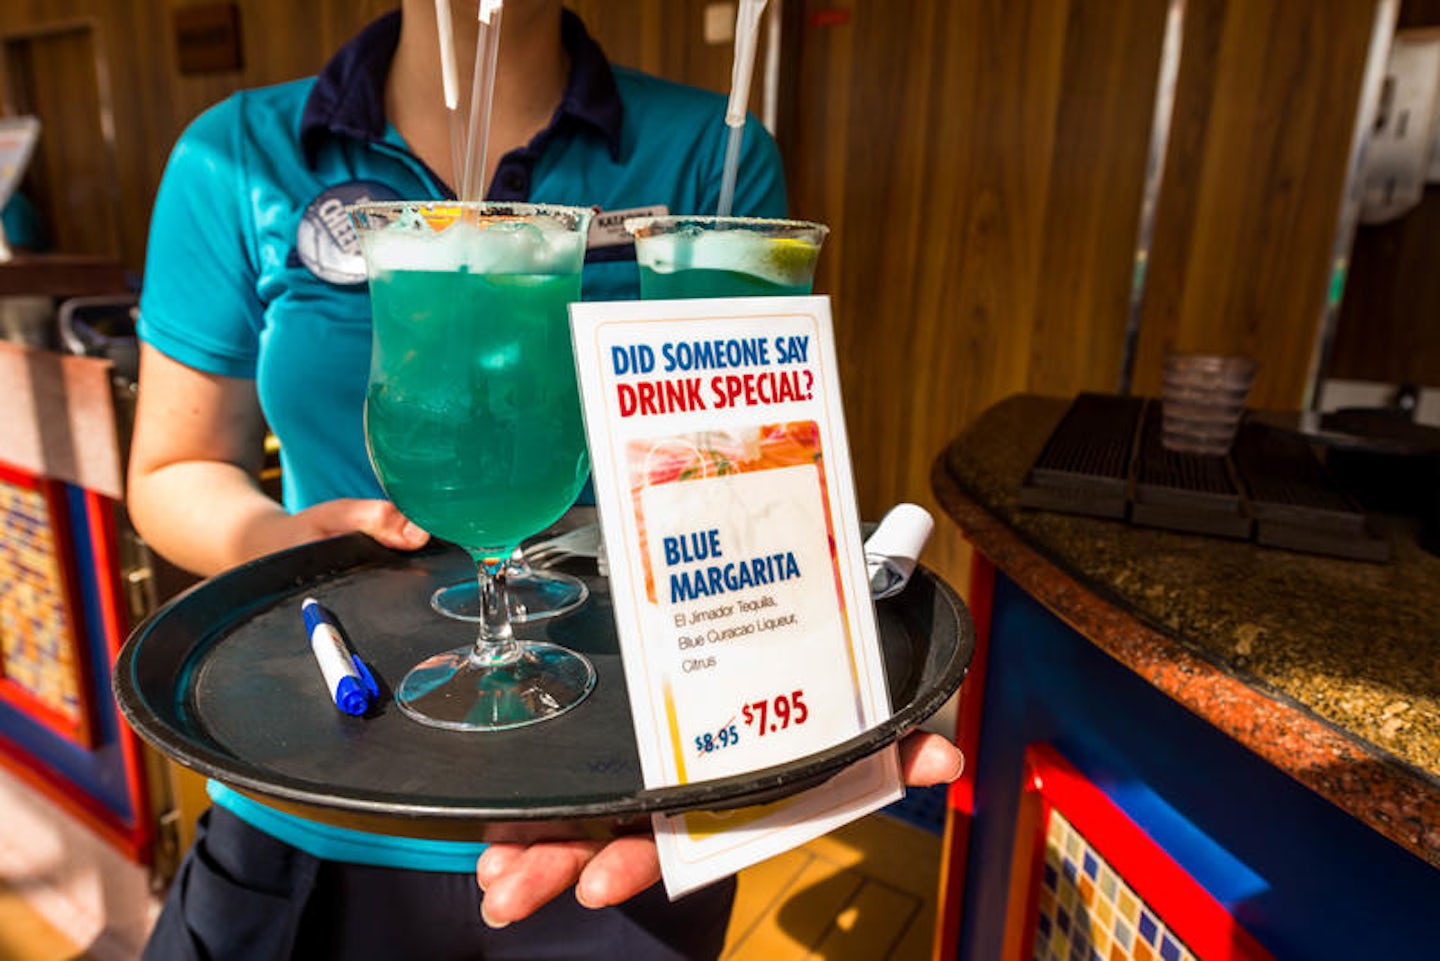 Mixologist Competition on Carnival Legend